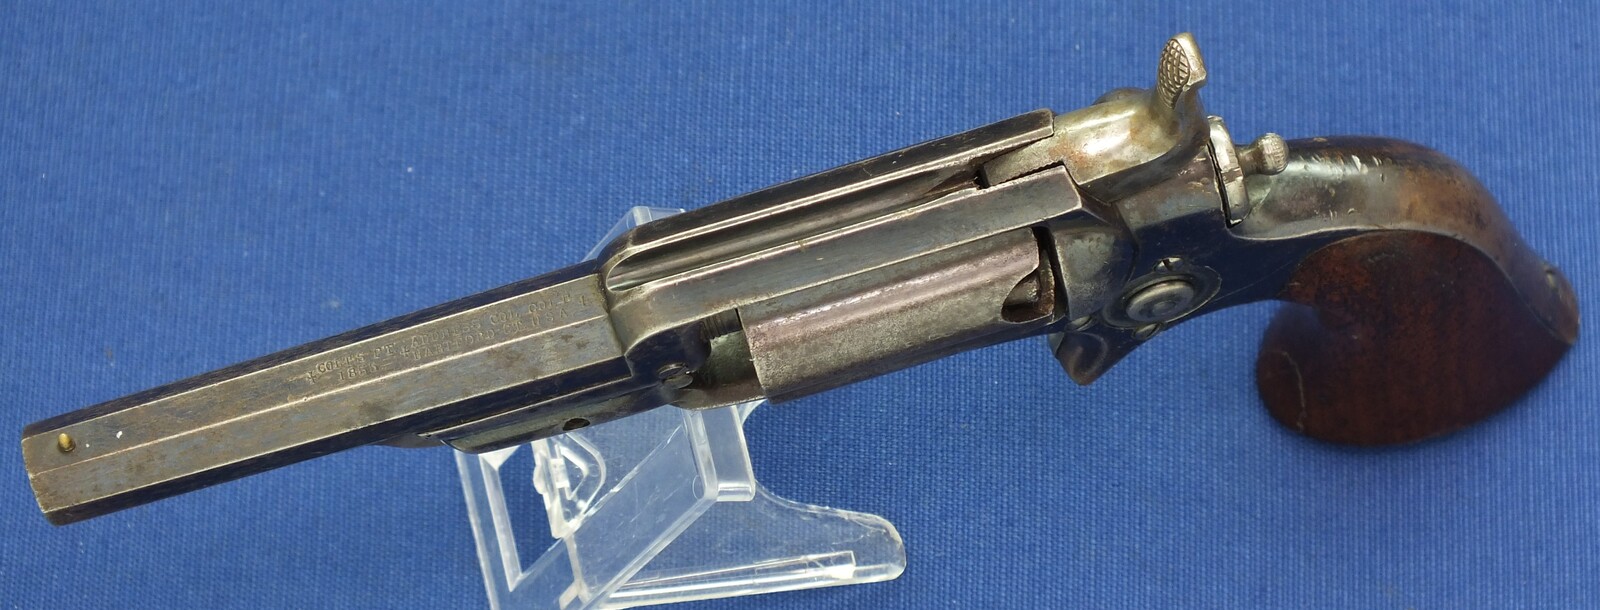 A fine antique American Colt Model 1855 Root Model 3A Sidehammer Pocket percussion Revolver. 5 shot Fluted cylinder. 31 Caliber. 3,5 inch octagonal barrel with Hartford address. Length 22cm. In very good condition. Price 2.450 euro.